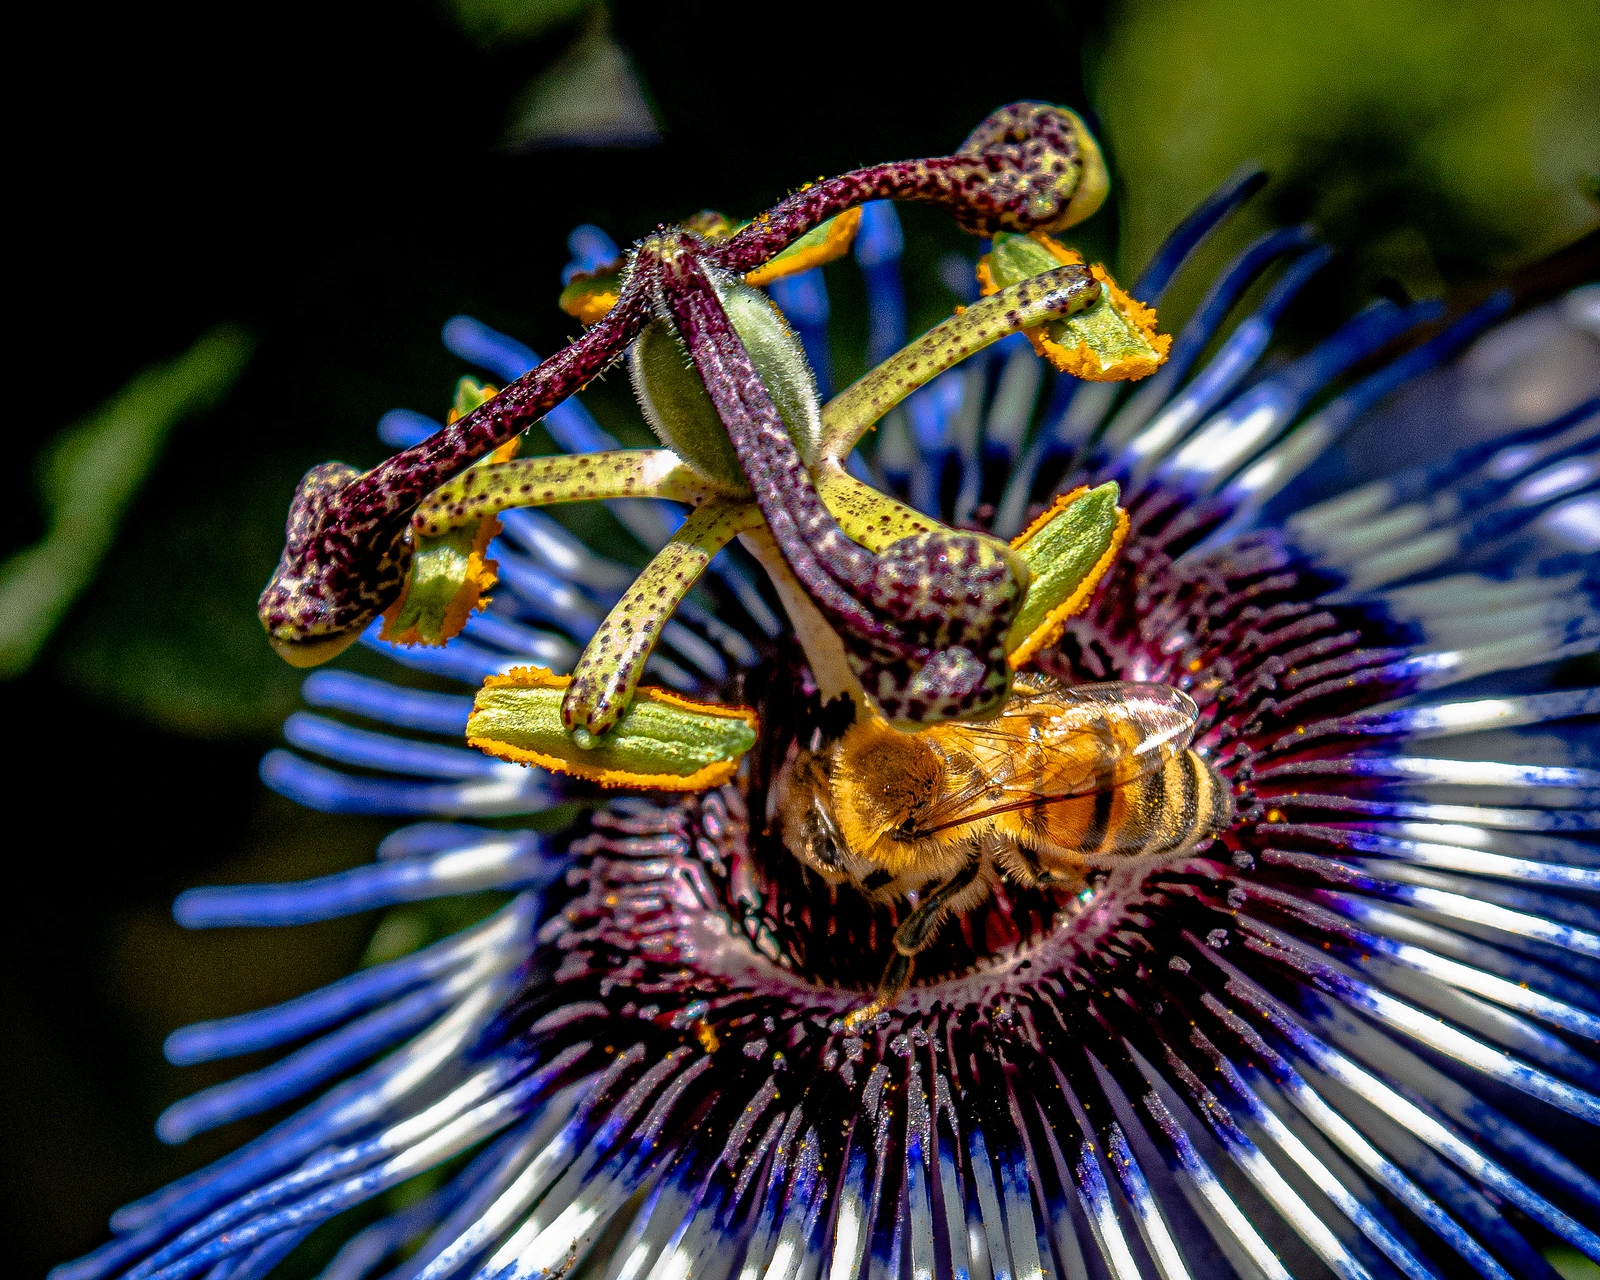 Honey bee and Purple Passion Flower. Beauty in nature.